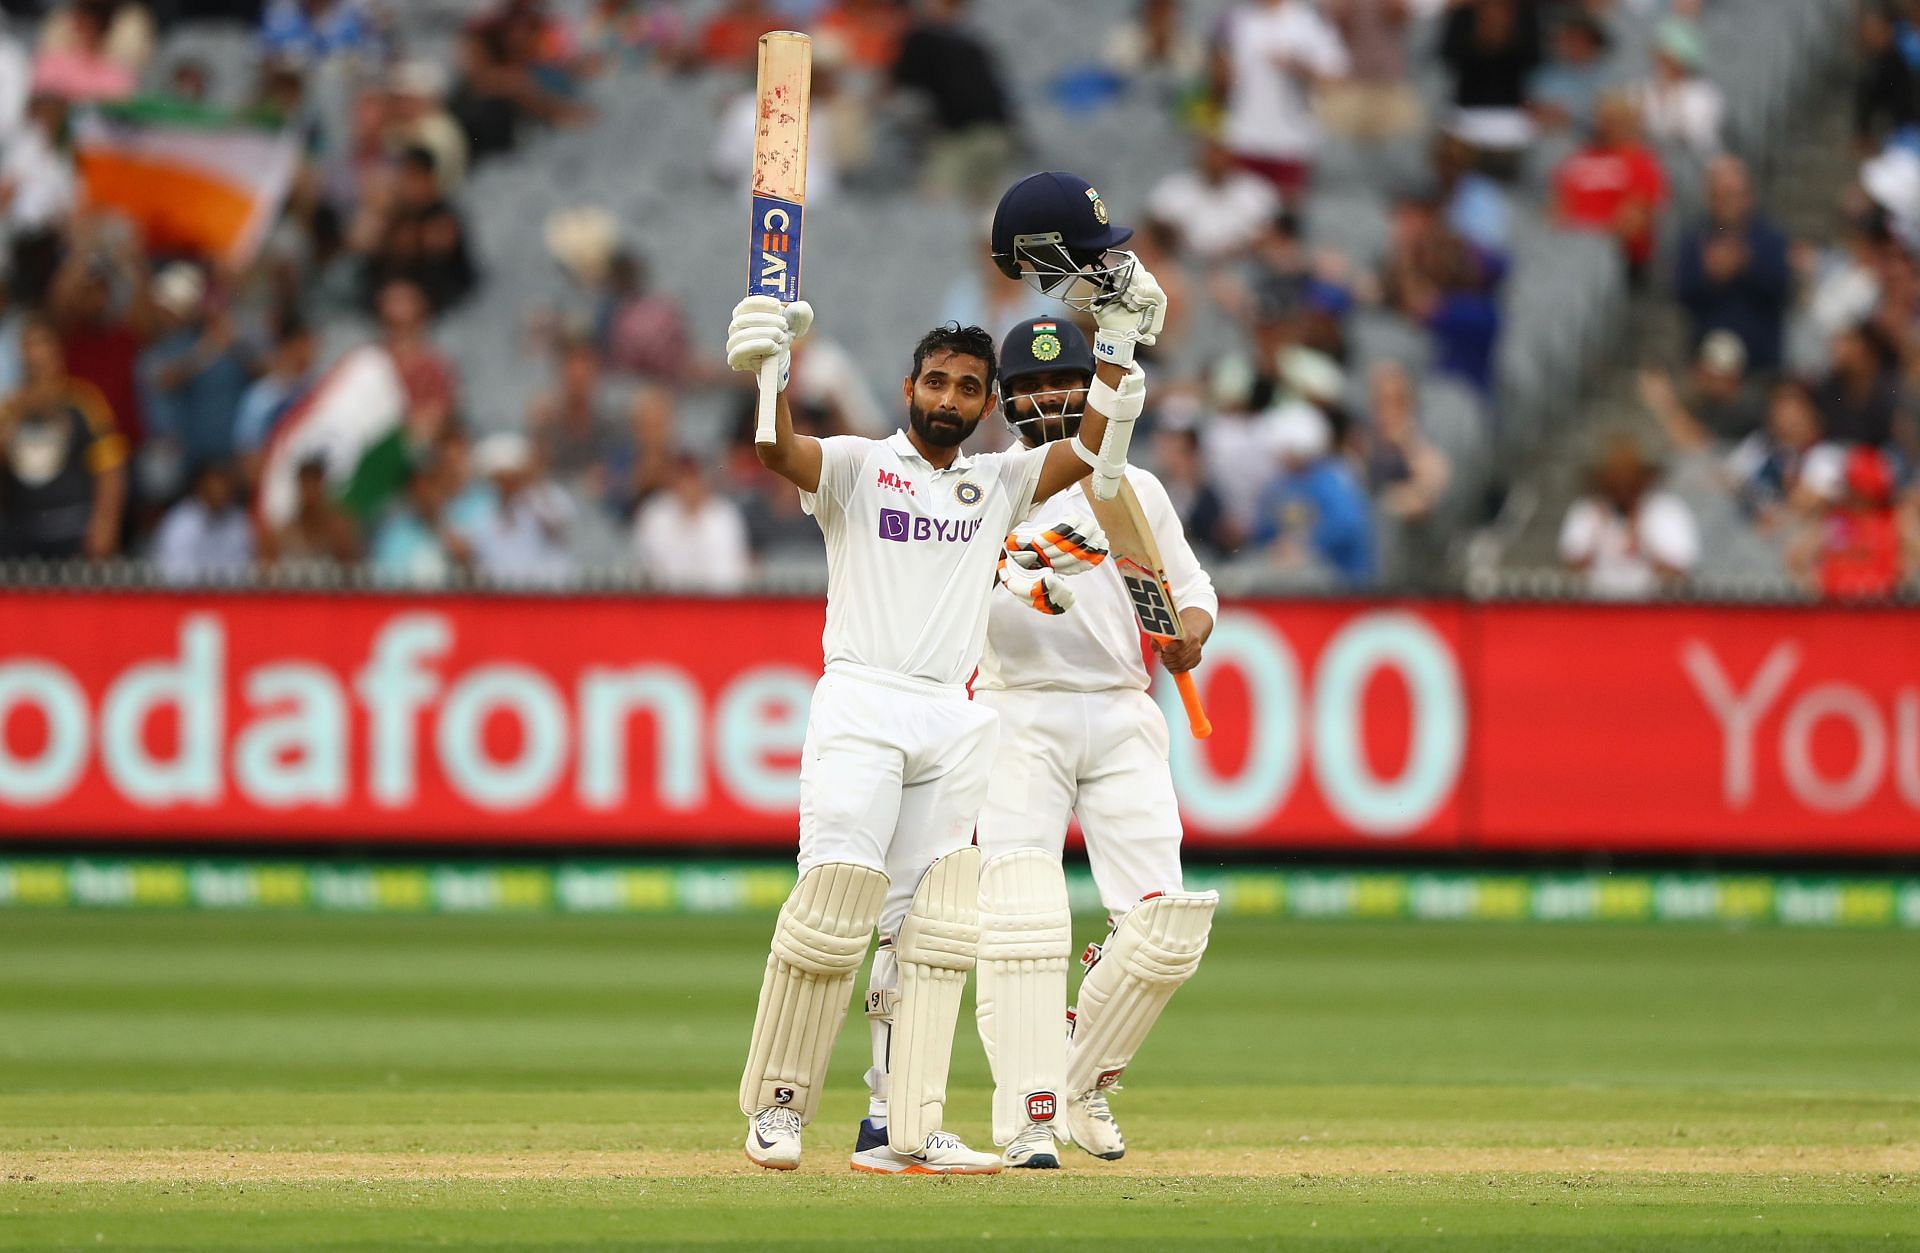 Rahane raises his bat after scoring a century in the second Test of the 2020-21 tour. (Pic: Getty)